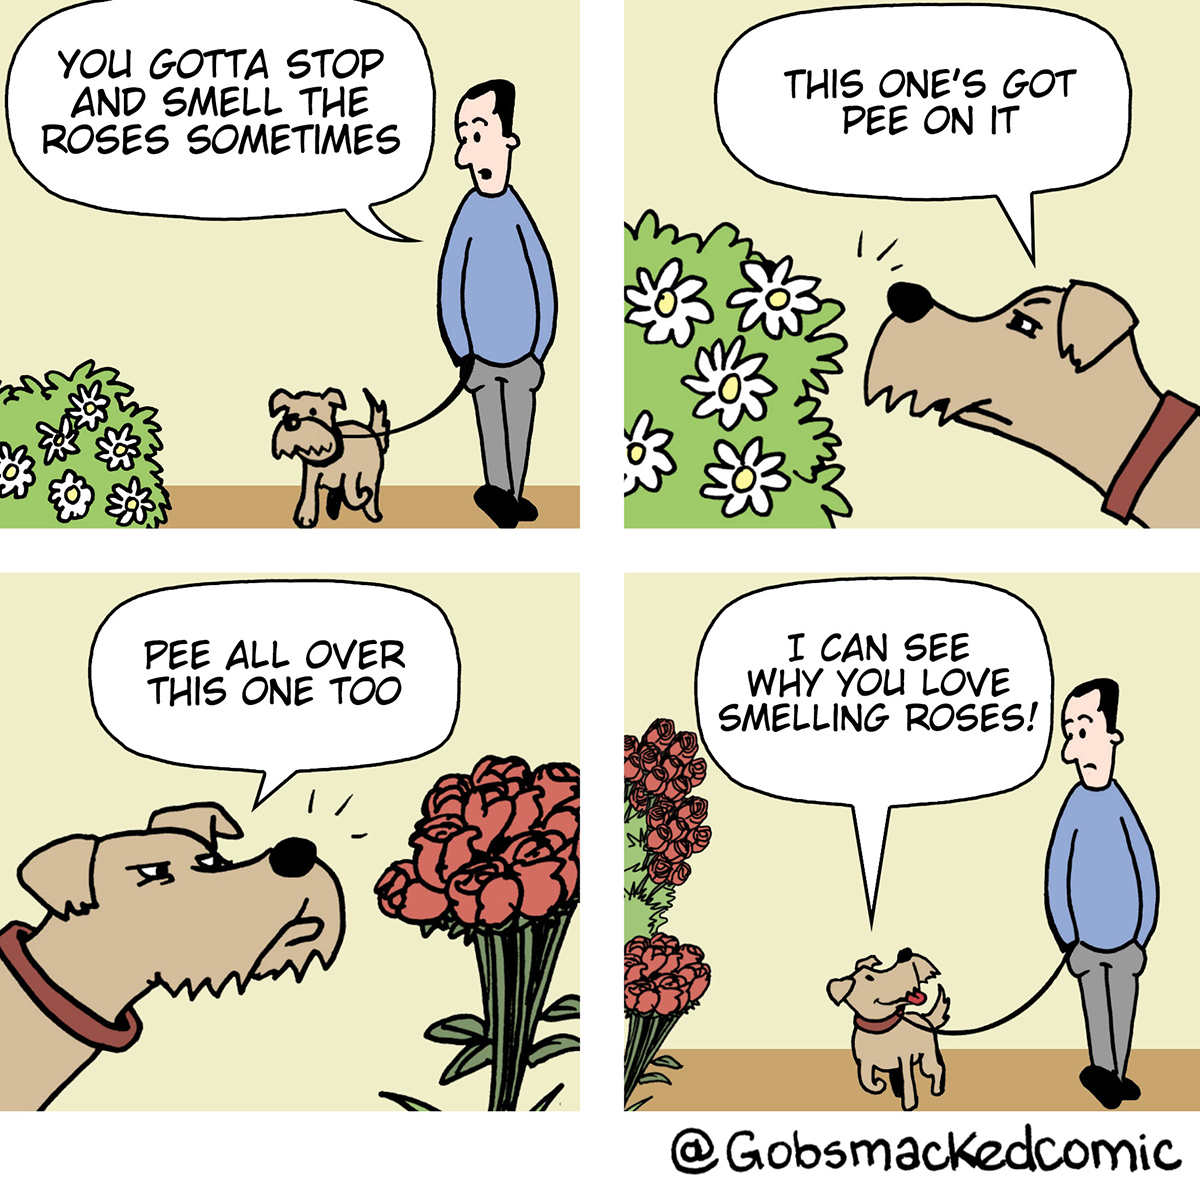 Why dogs like smelling flowers